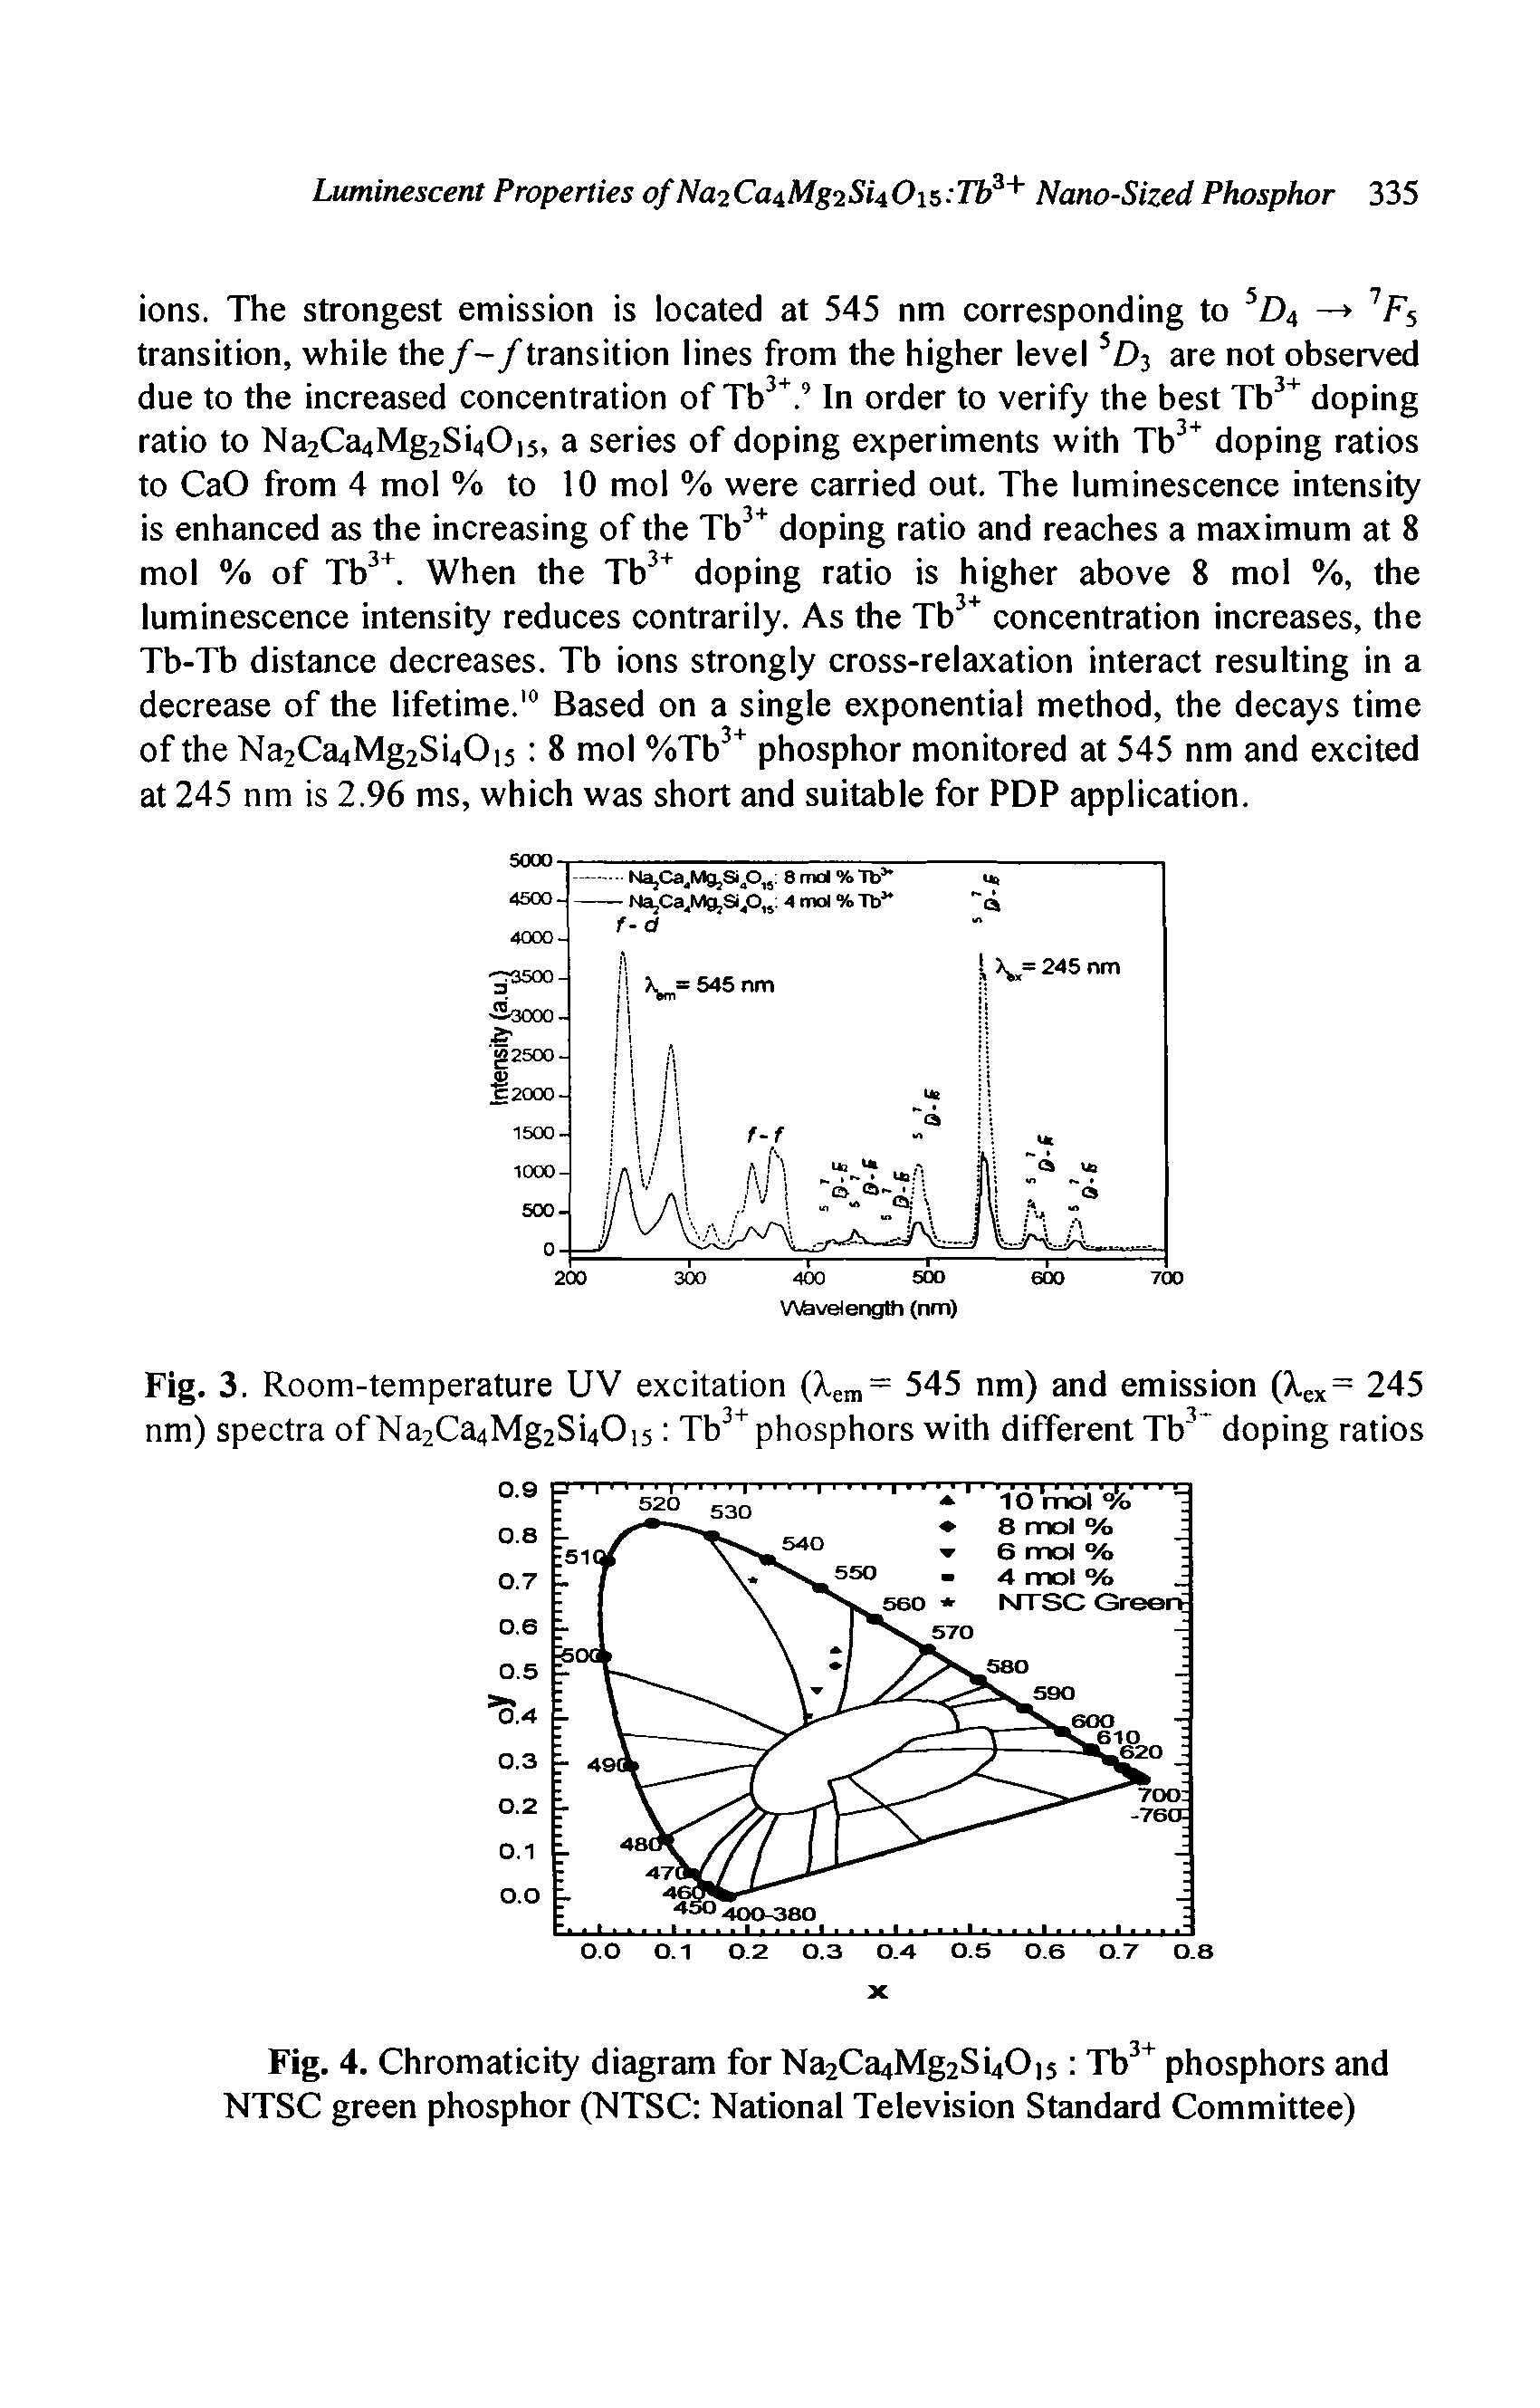 Fig. 4. Chromaticity diagram for Na2Ca4Mg2Si40i5 Tb3+ phosphors and NTSC green phosphor (NTSC National Television Standard Committee)...